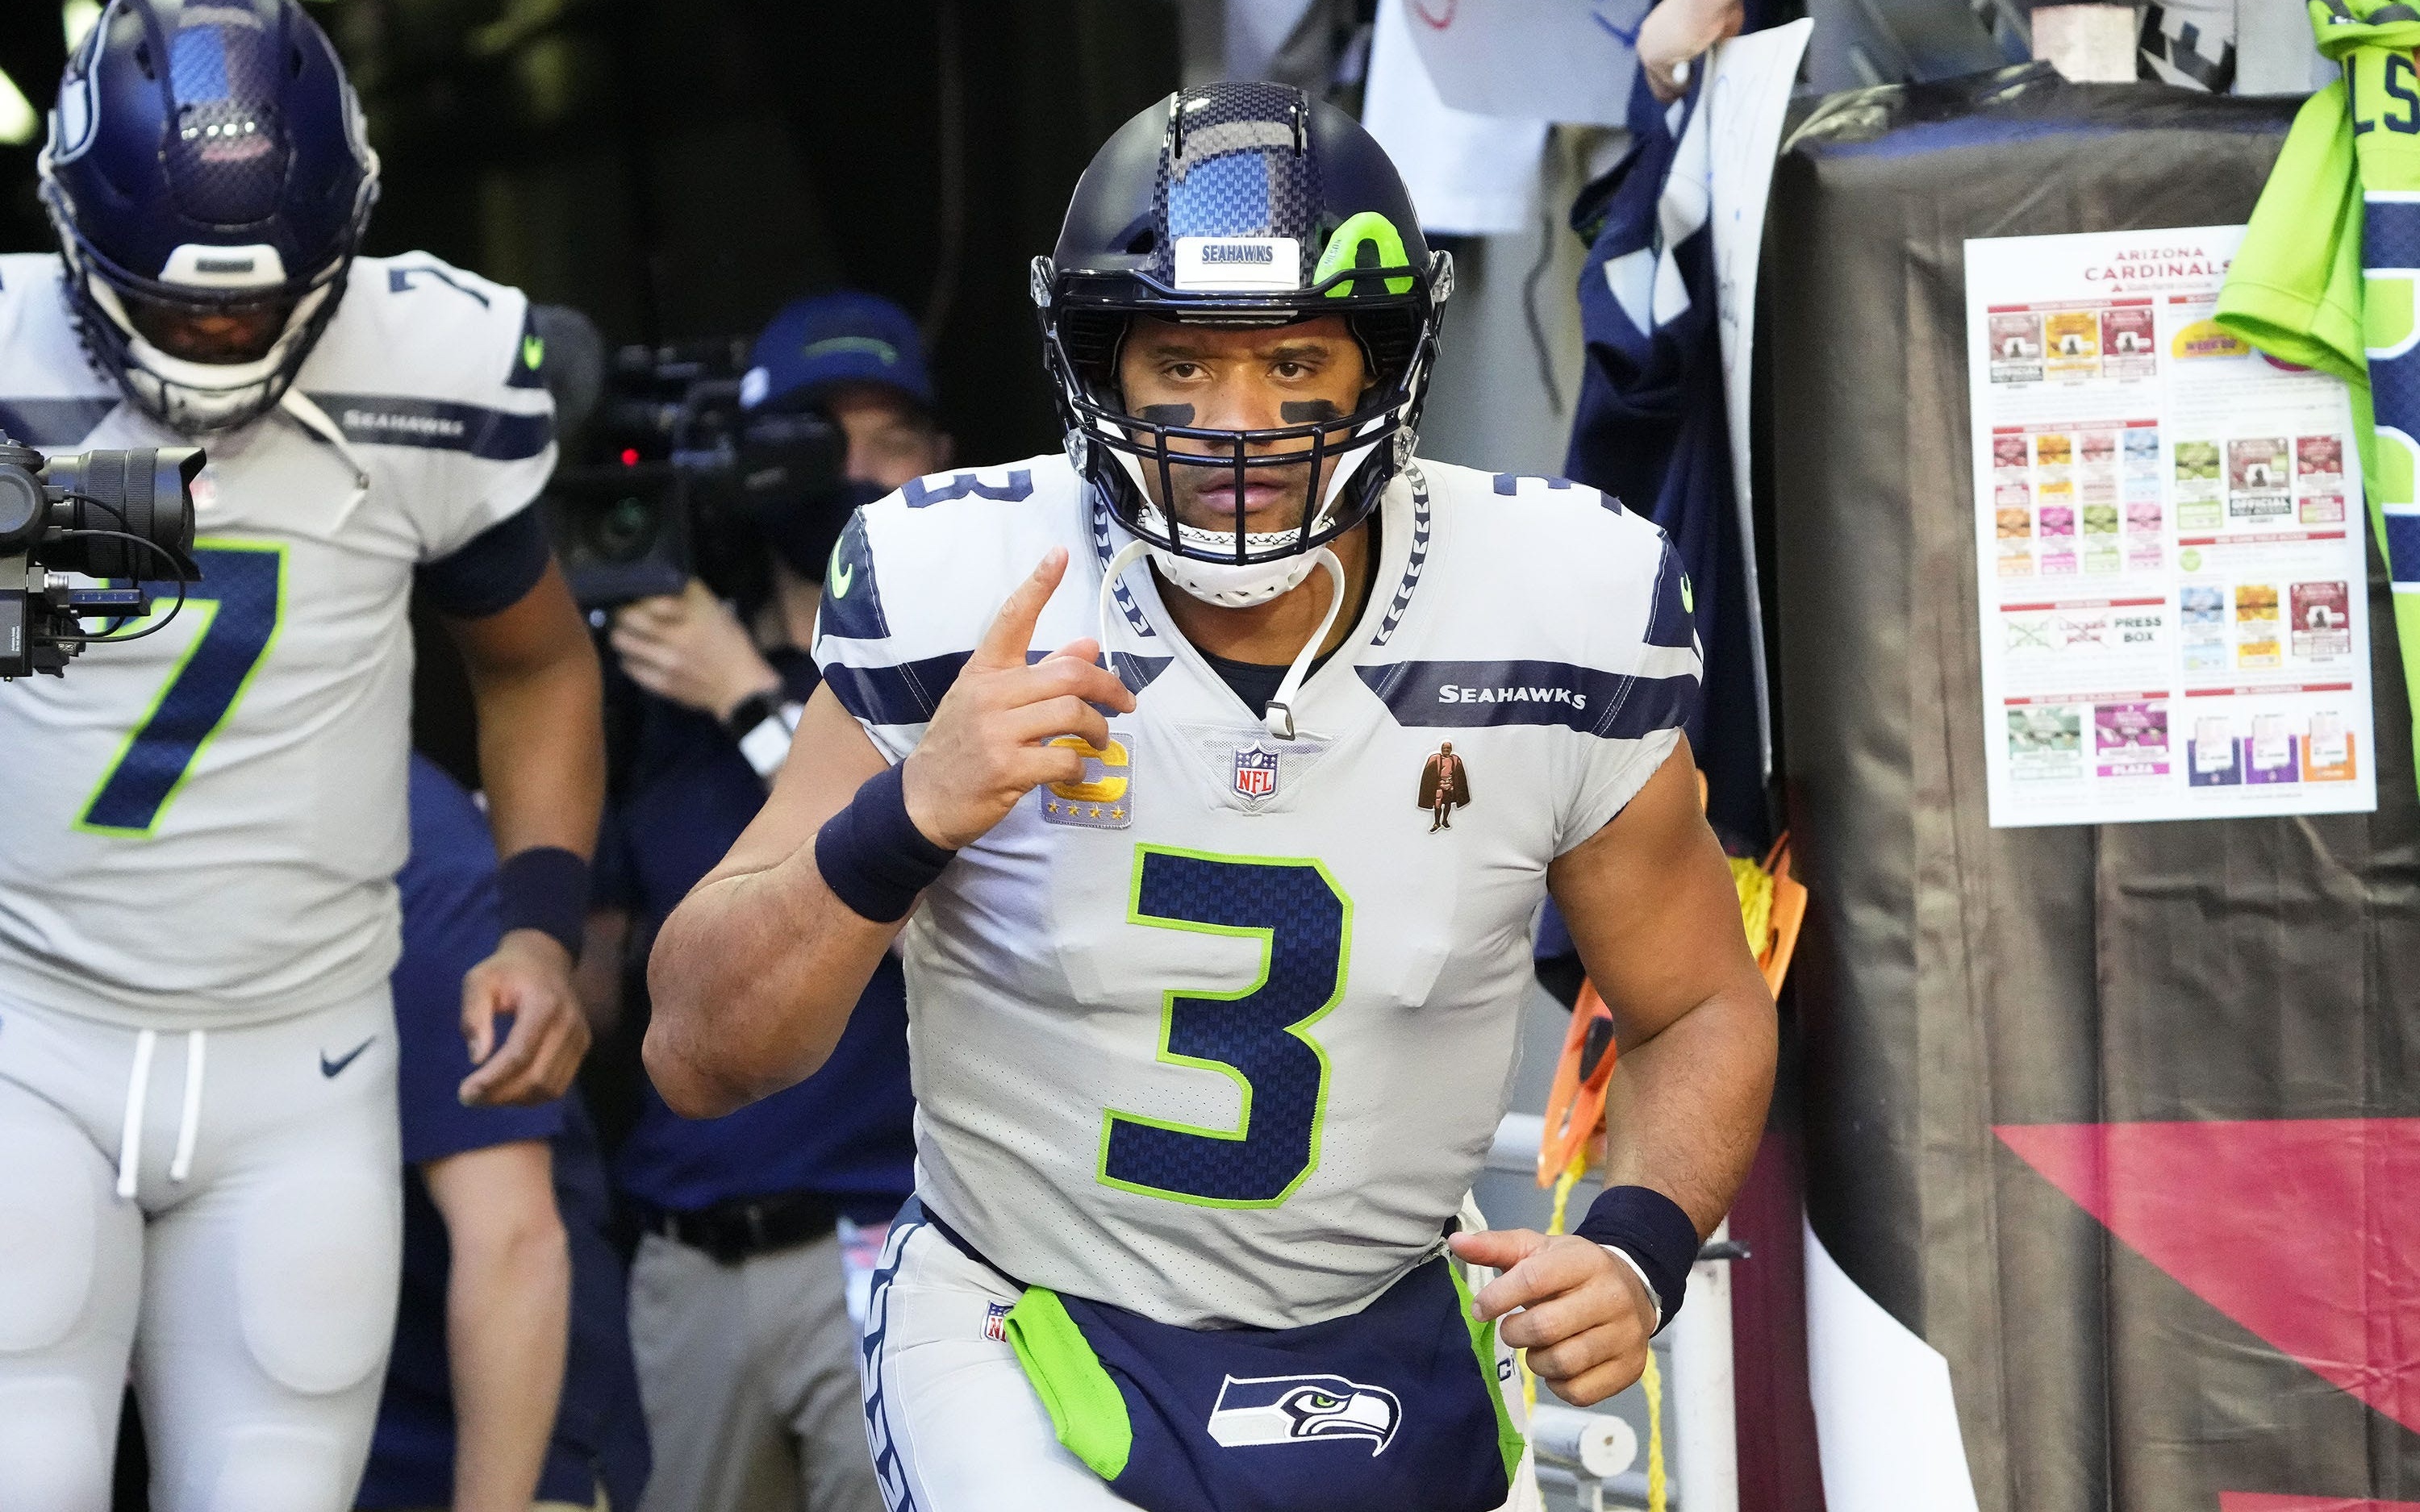 Russell Wilson. Credit: Rob Schumacher, USA TODAY Sports.